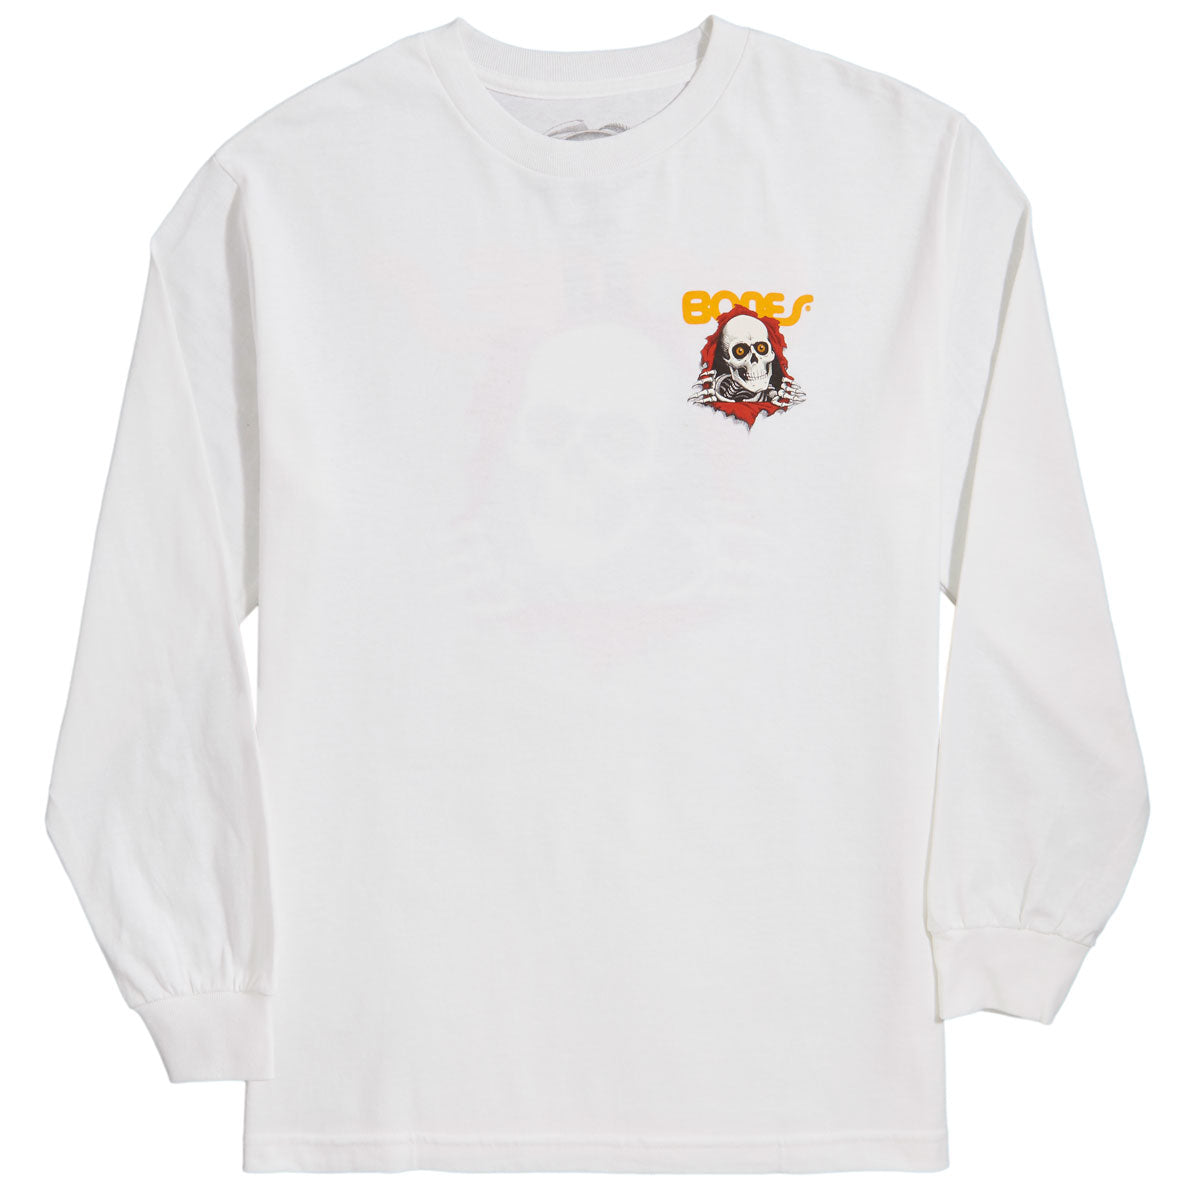 Powell-Peralta Ripper Long Sleeve T-Shirt - White image 2